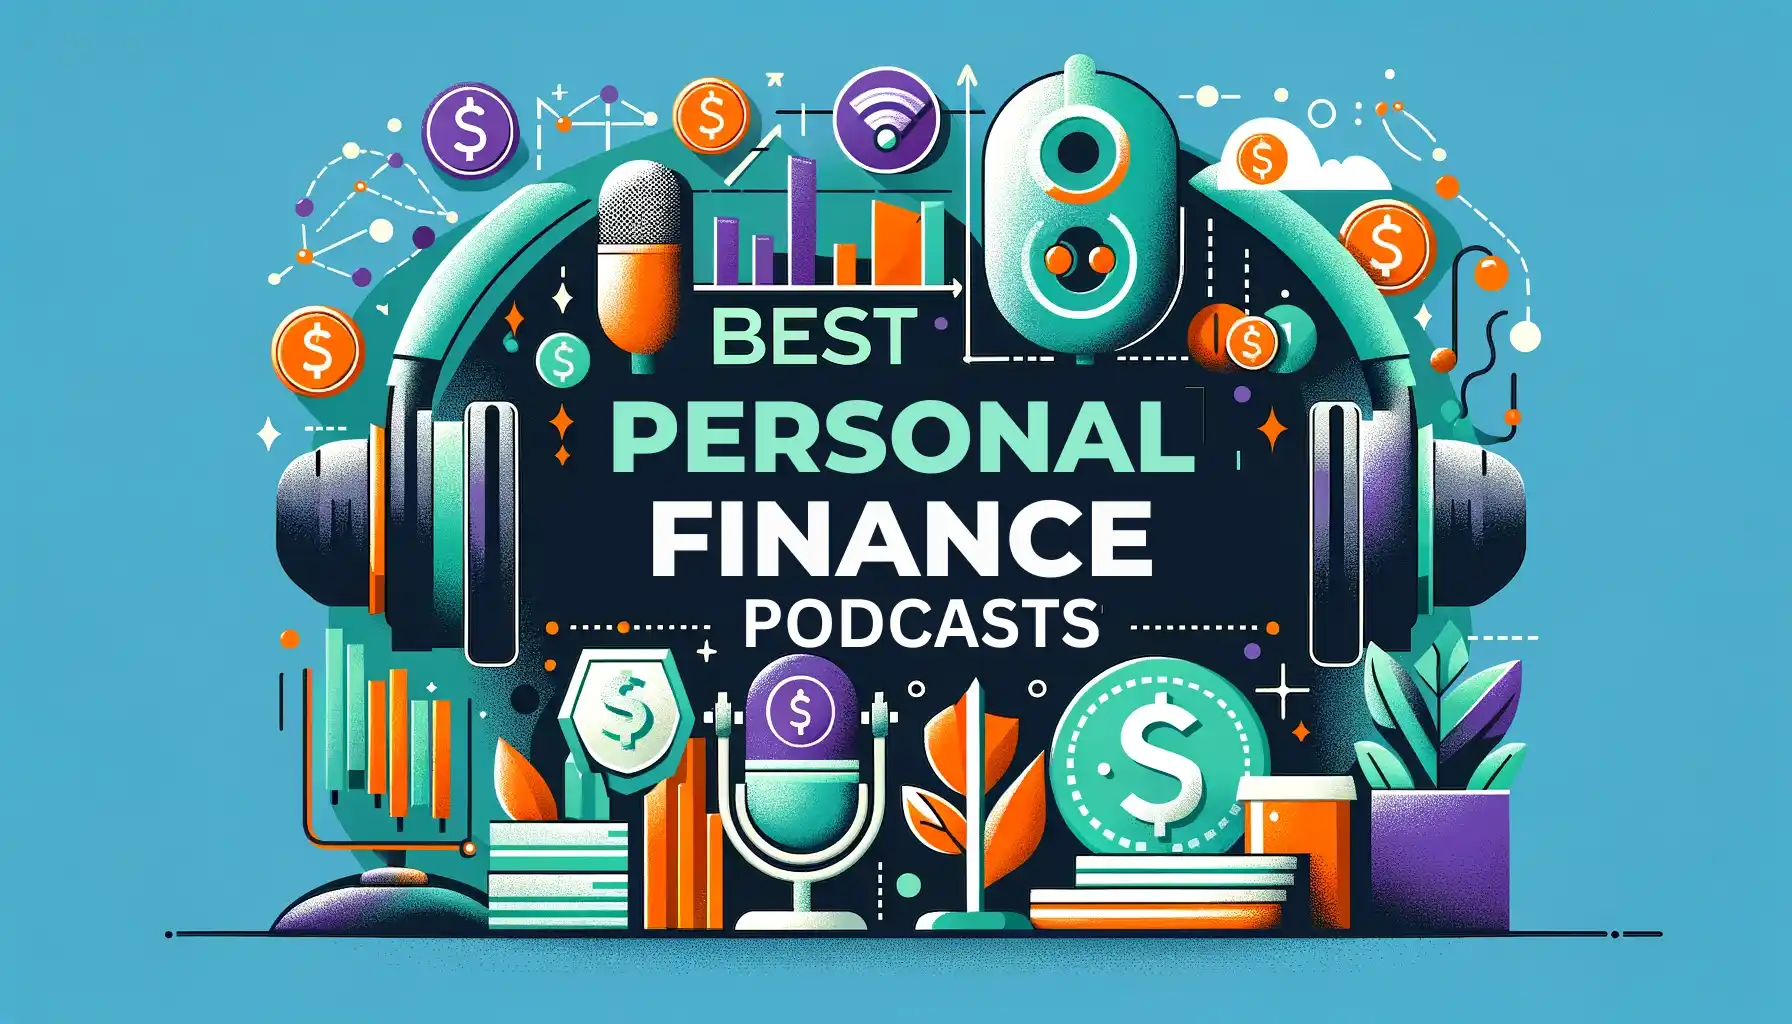 8 Best Personal Finance Podcasts to Listen Suggest Wise